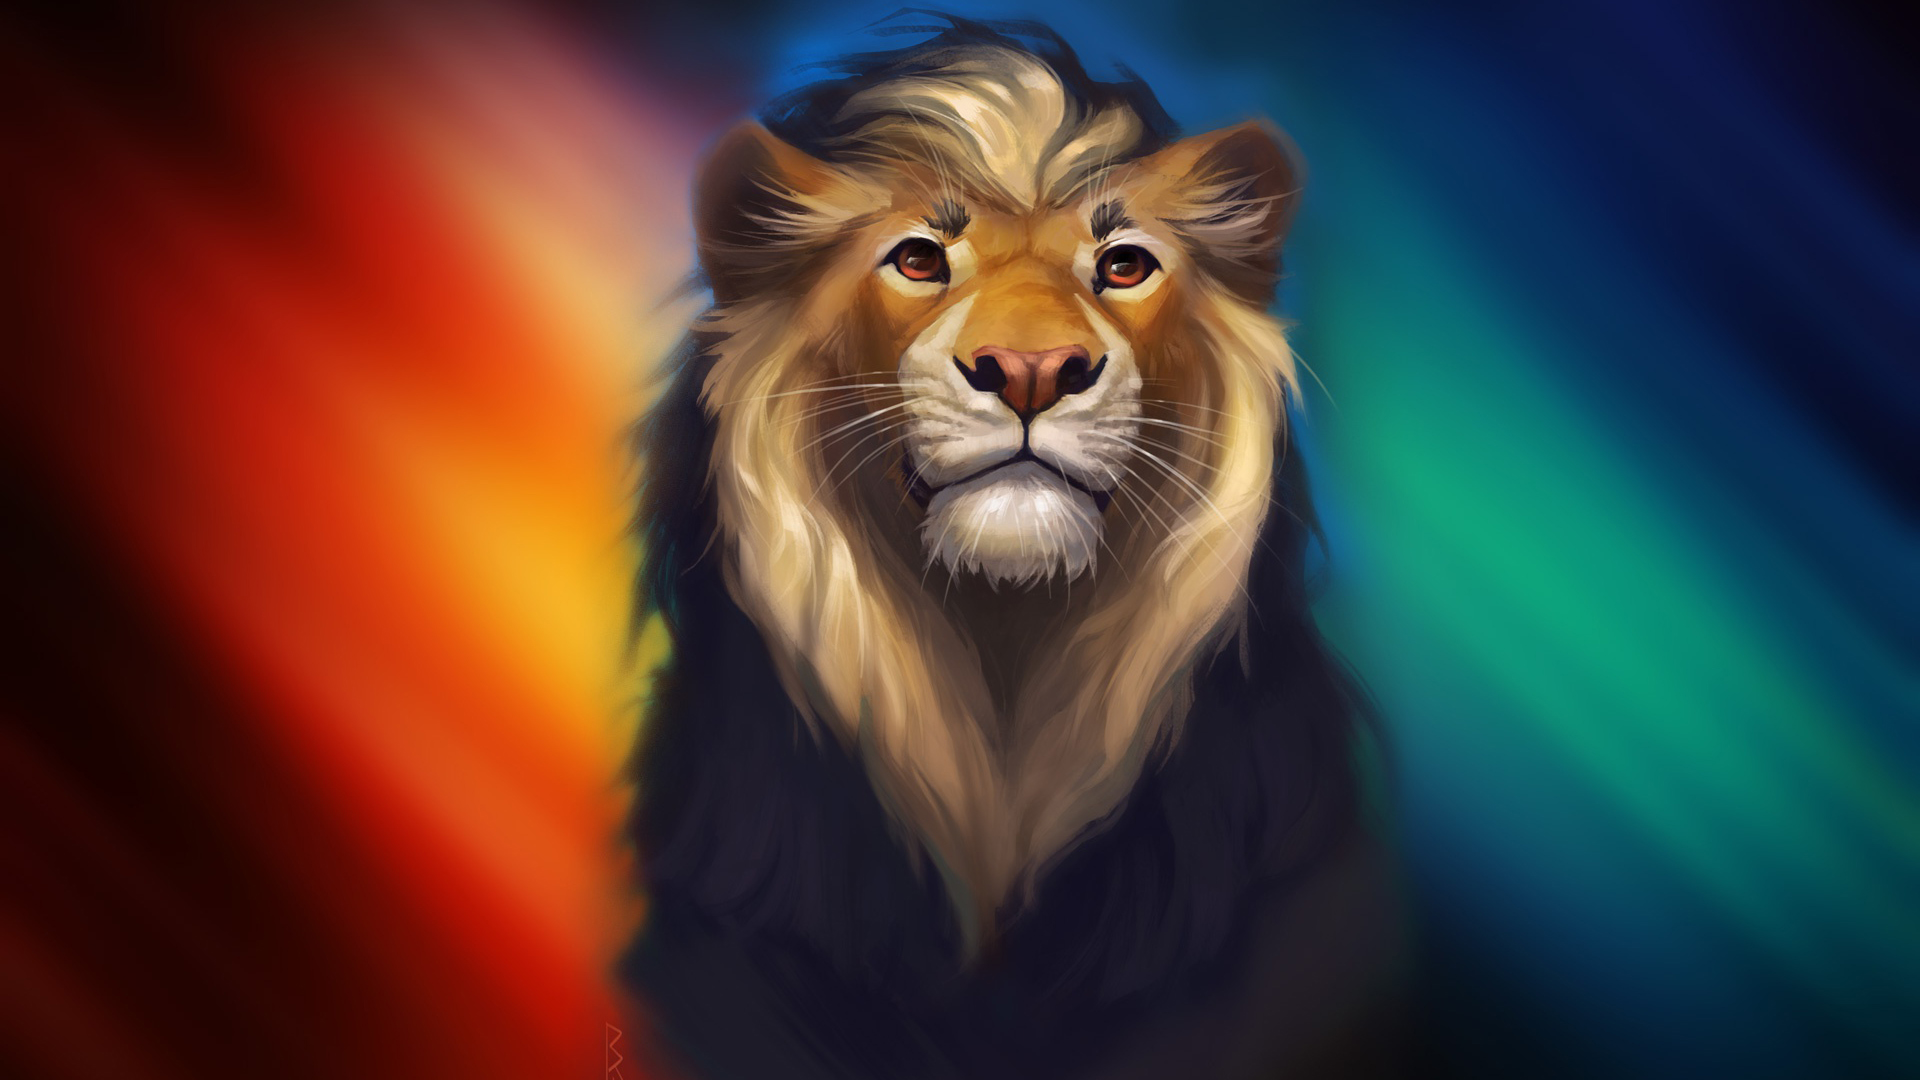 Artistic Lion With Red Eyes In Colorful Wallpaper 2K Lion